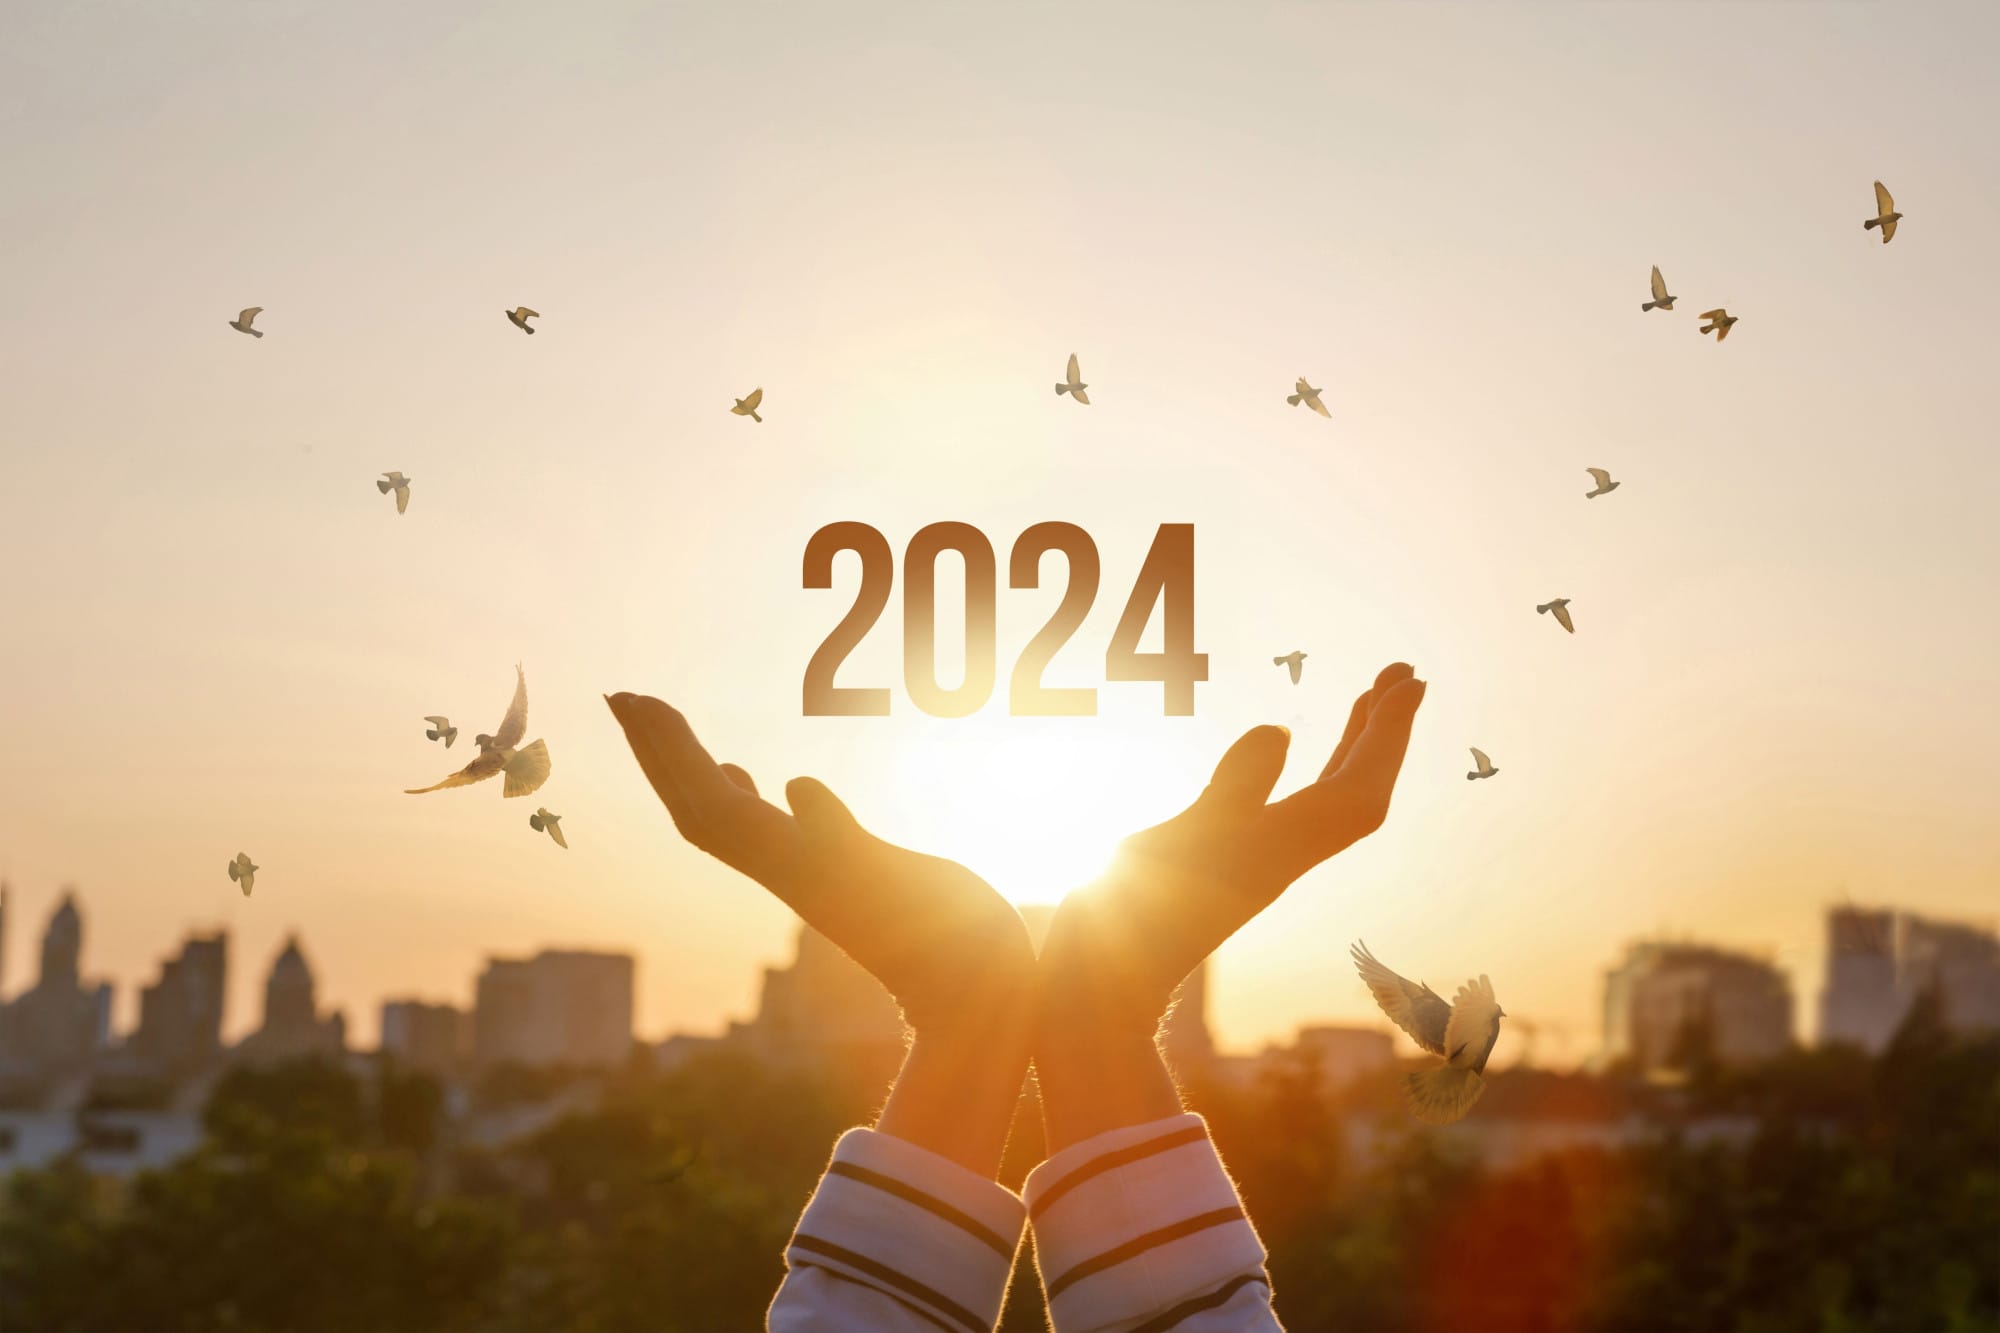 Review your finances and look forward to a prosperous year ahead : the image shows hands reaching up to the sky with doves and 2024.